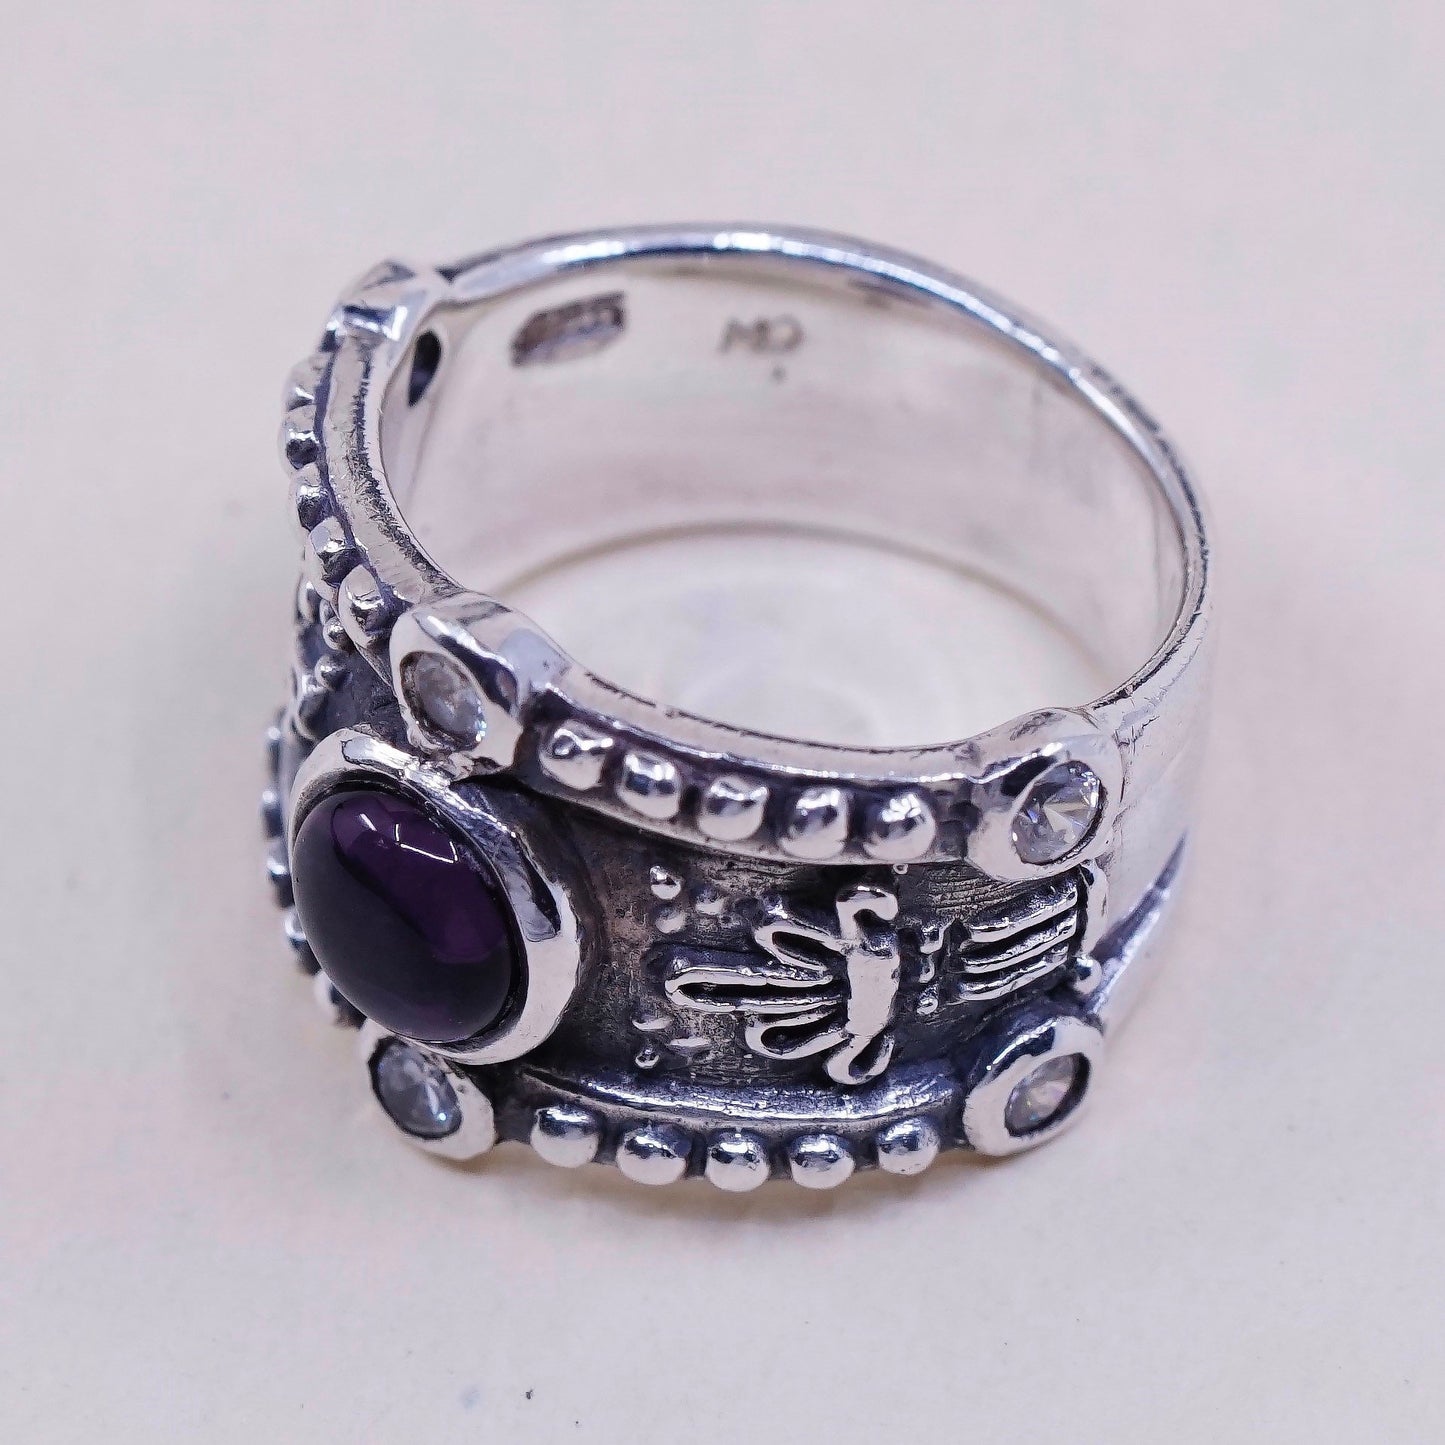 sz 6, sterling silver handmade statement ring, 925 wide band w/ amethyst and Cz